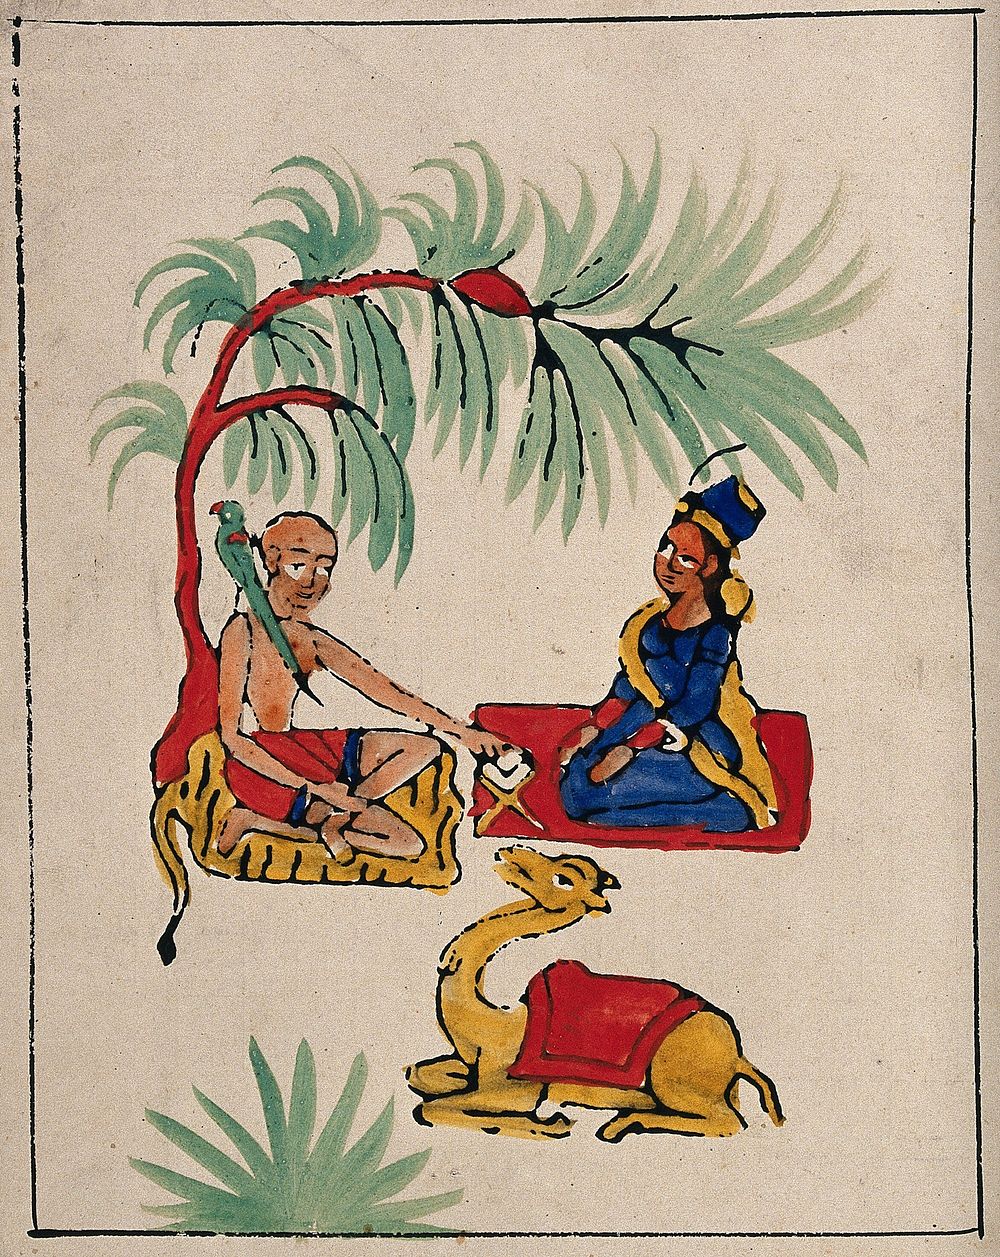 A woman getting advice from a hermit sitting under a tree. Gouache painting by an Indian painter.